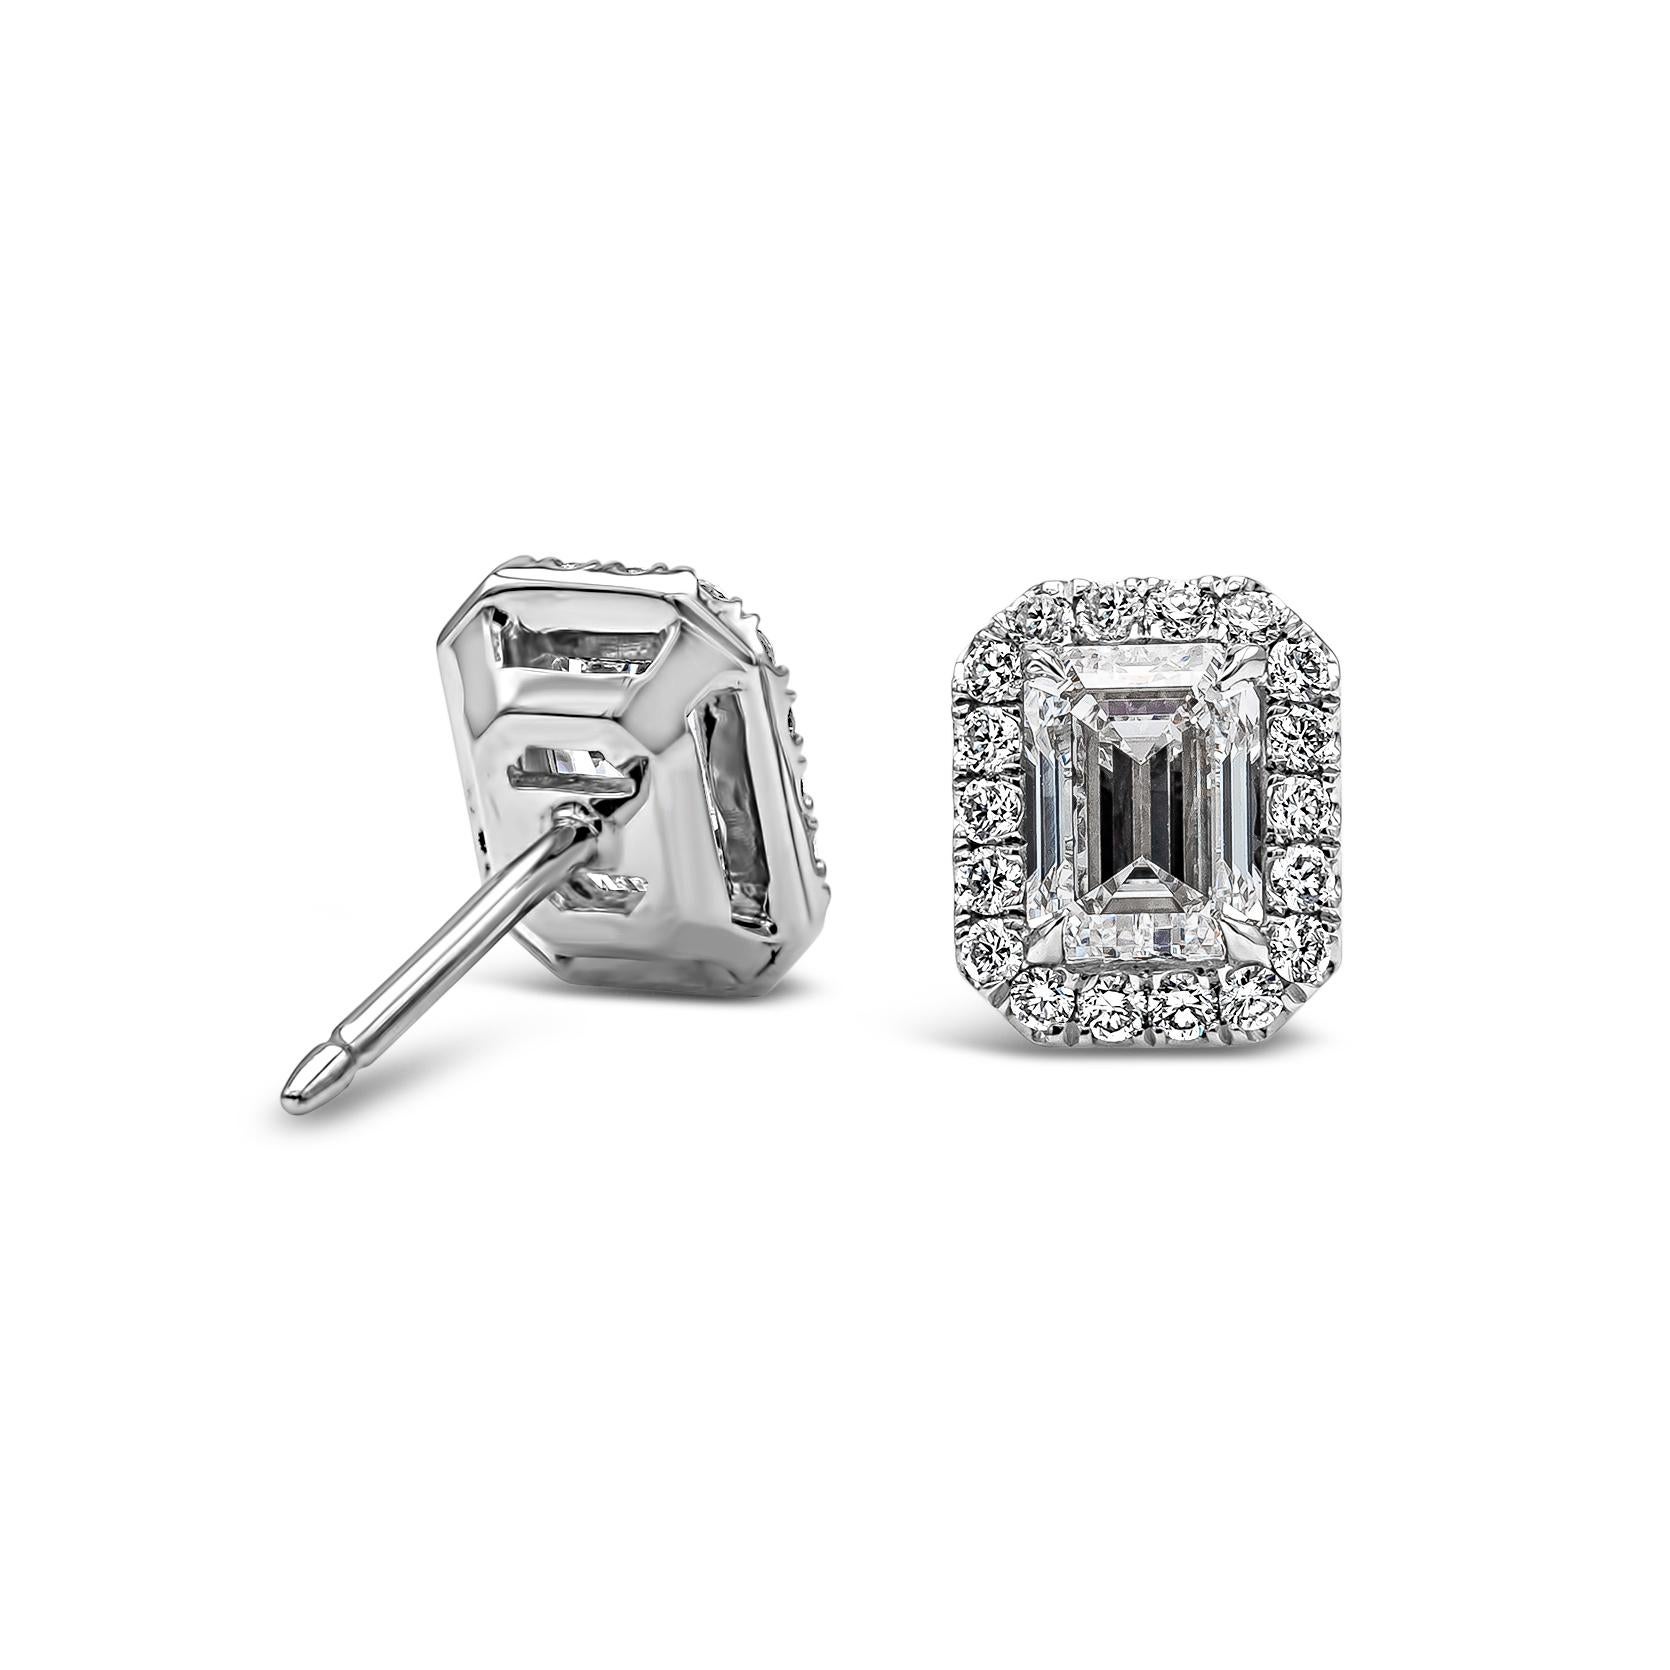 A fashionable pair of stud earrings showcasing two emerald cut diamonds weighing 1.41 carats total, certified by GIA as D-F Color, SI1 in Clarity. Each emerald cut diamond is surrounded by a single row of round diamonds 0.27 carats total, F Color